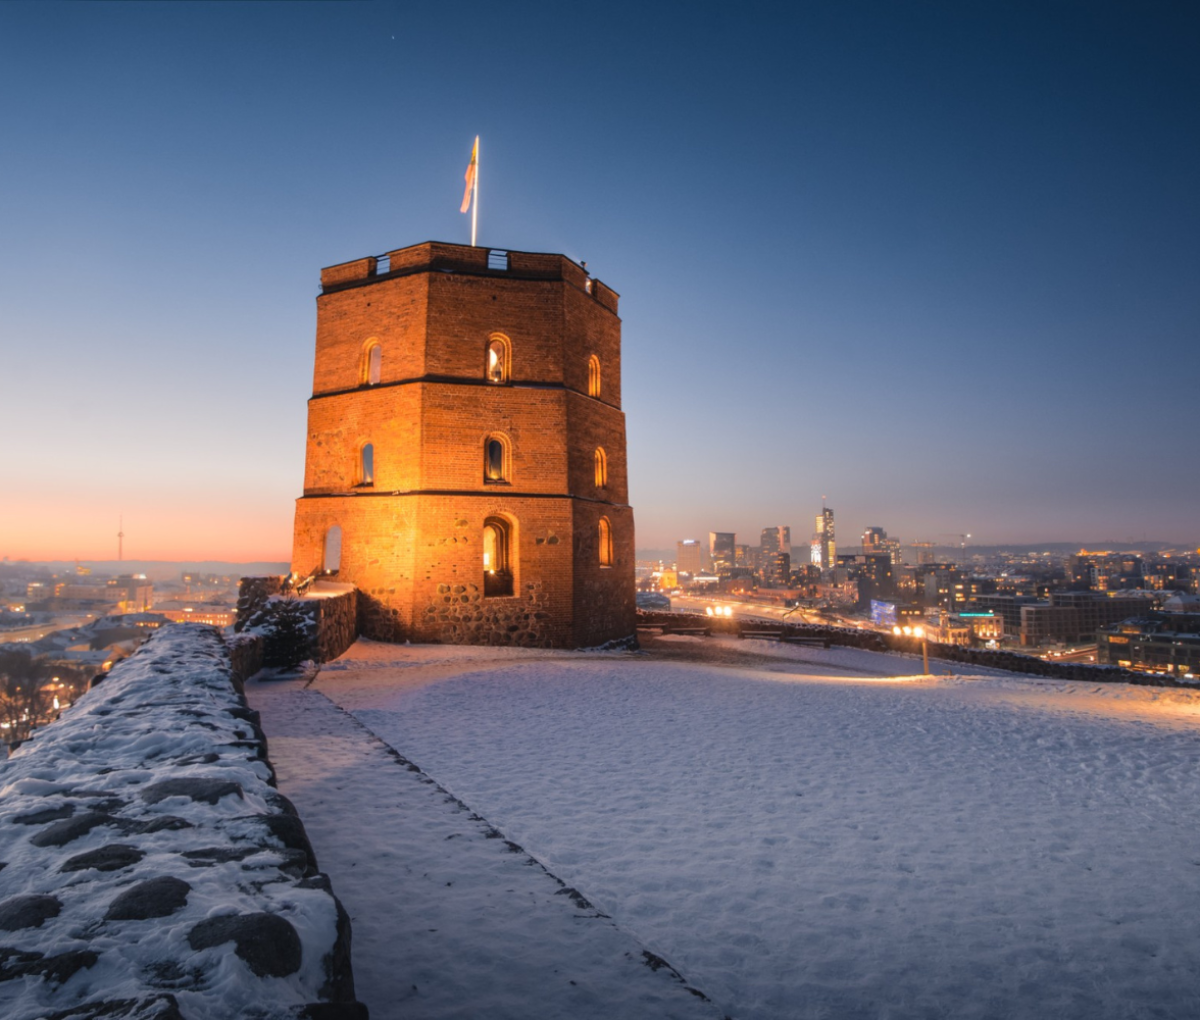 Winter sunset at blue hour in Vilnius, Lithuania